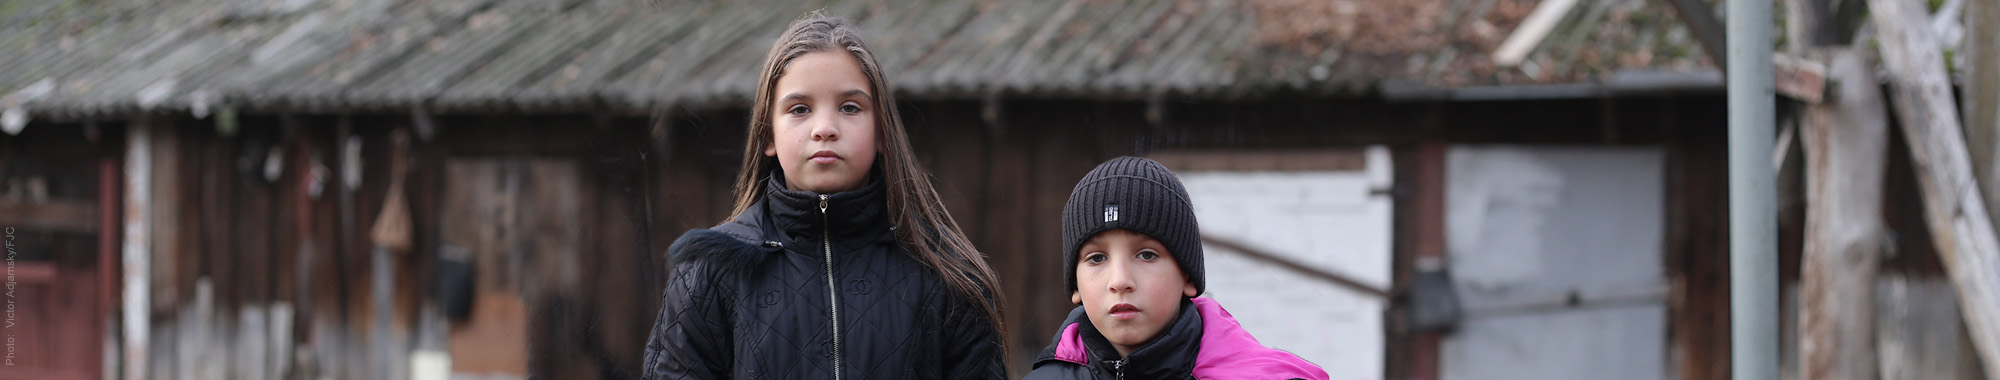 Two young children in black coats looking sad